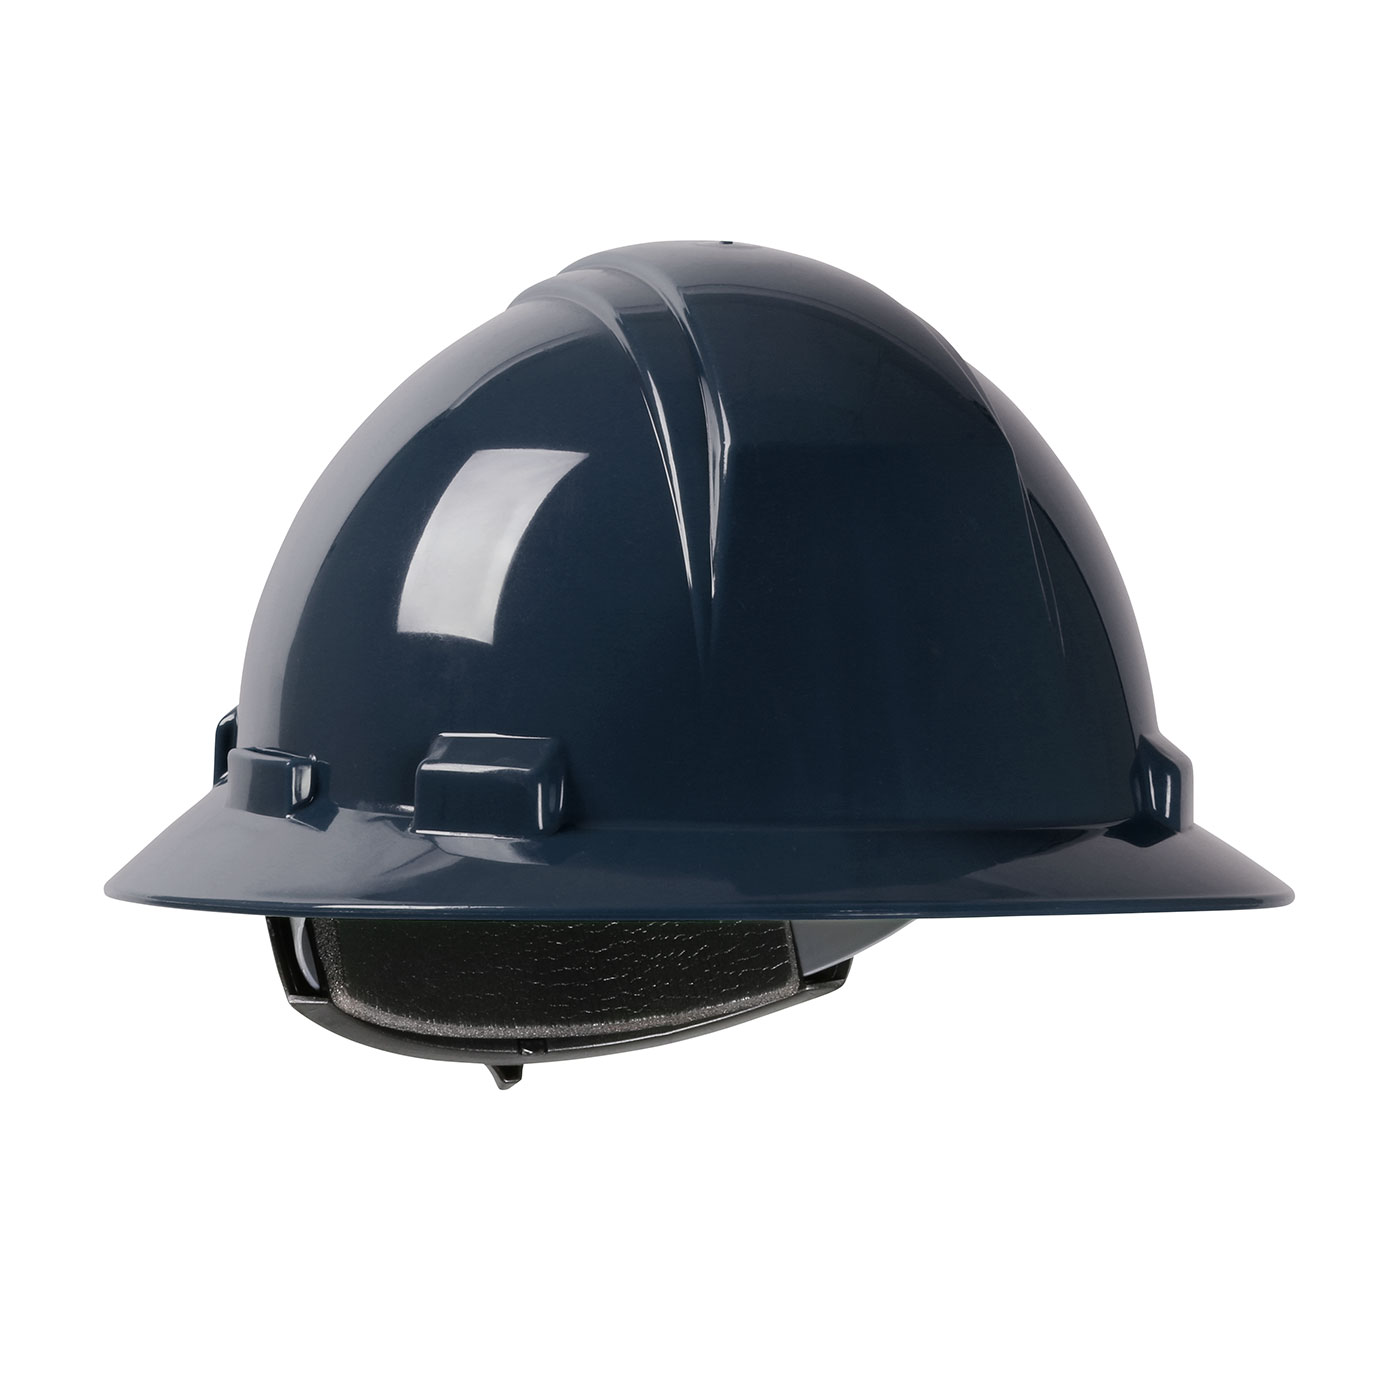 280-HP261R PIP® Dynamic Kilimanjaro™ Full Brim Hard Hat with HDPE Shell, 4-Point Textile Suspension and Wheel Ratchet Adjustment - Blue